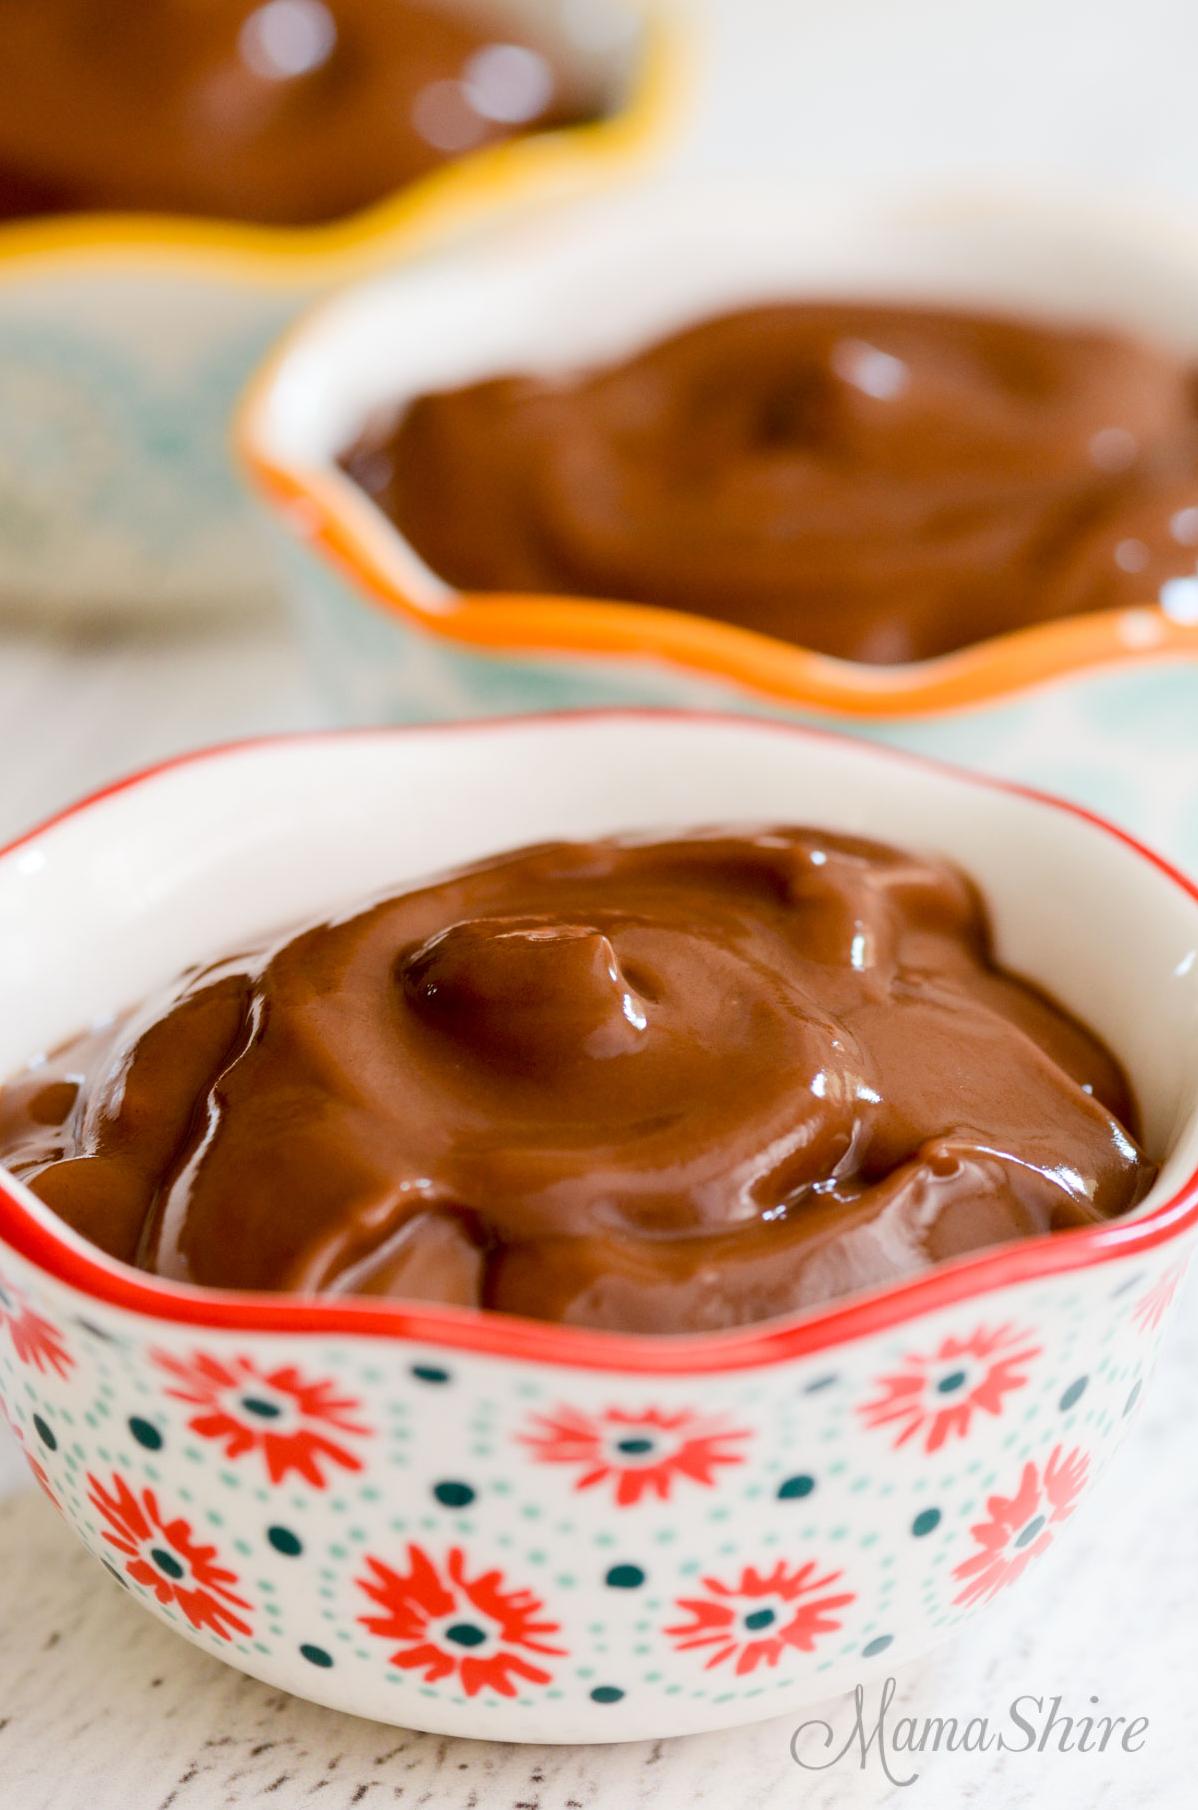  Rich, creamy, and chocolatey all at once - this gluten-free/dairy-free chocolate pudding hits all the right notes.